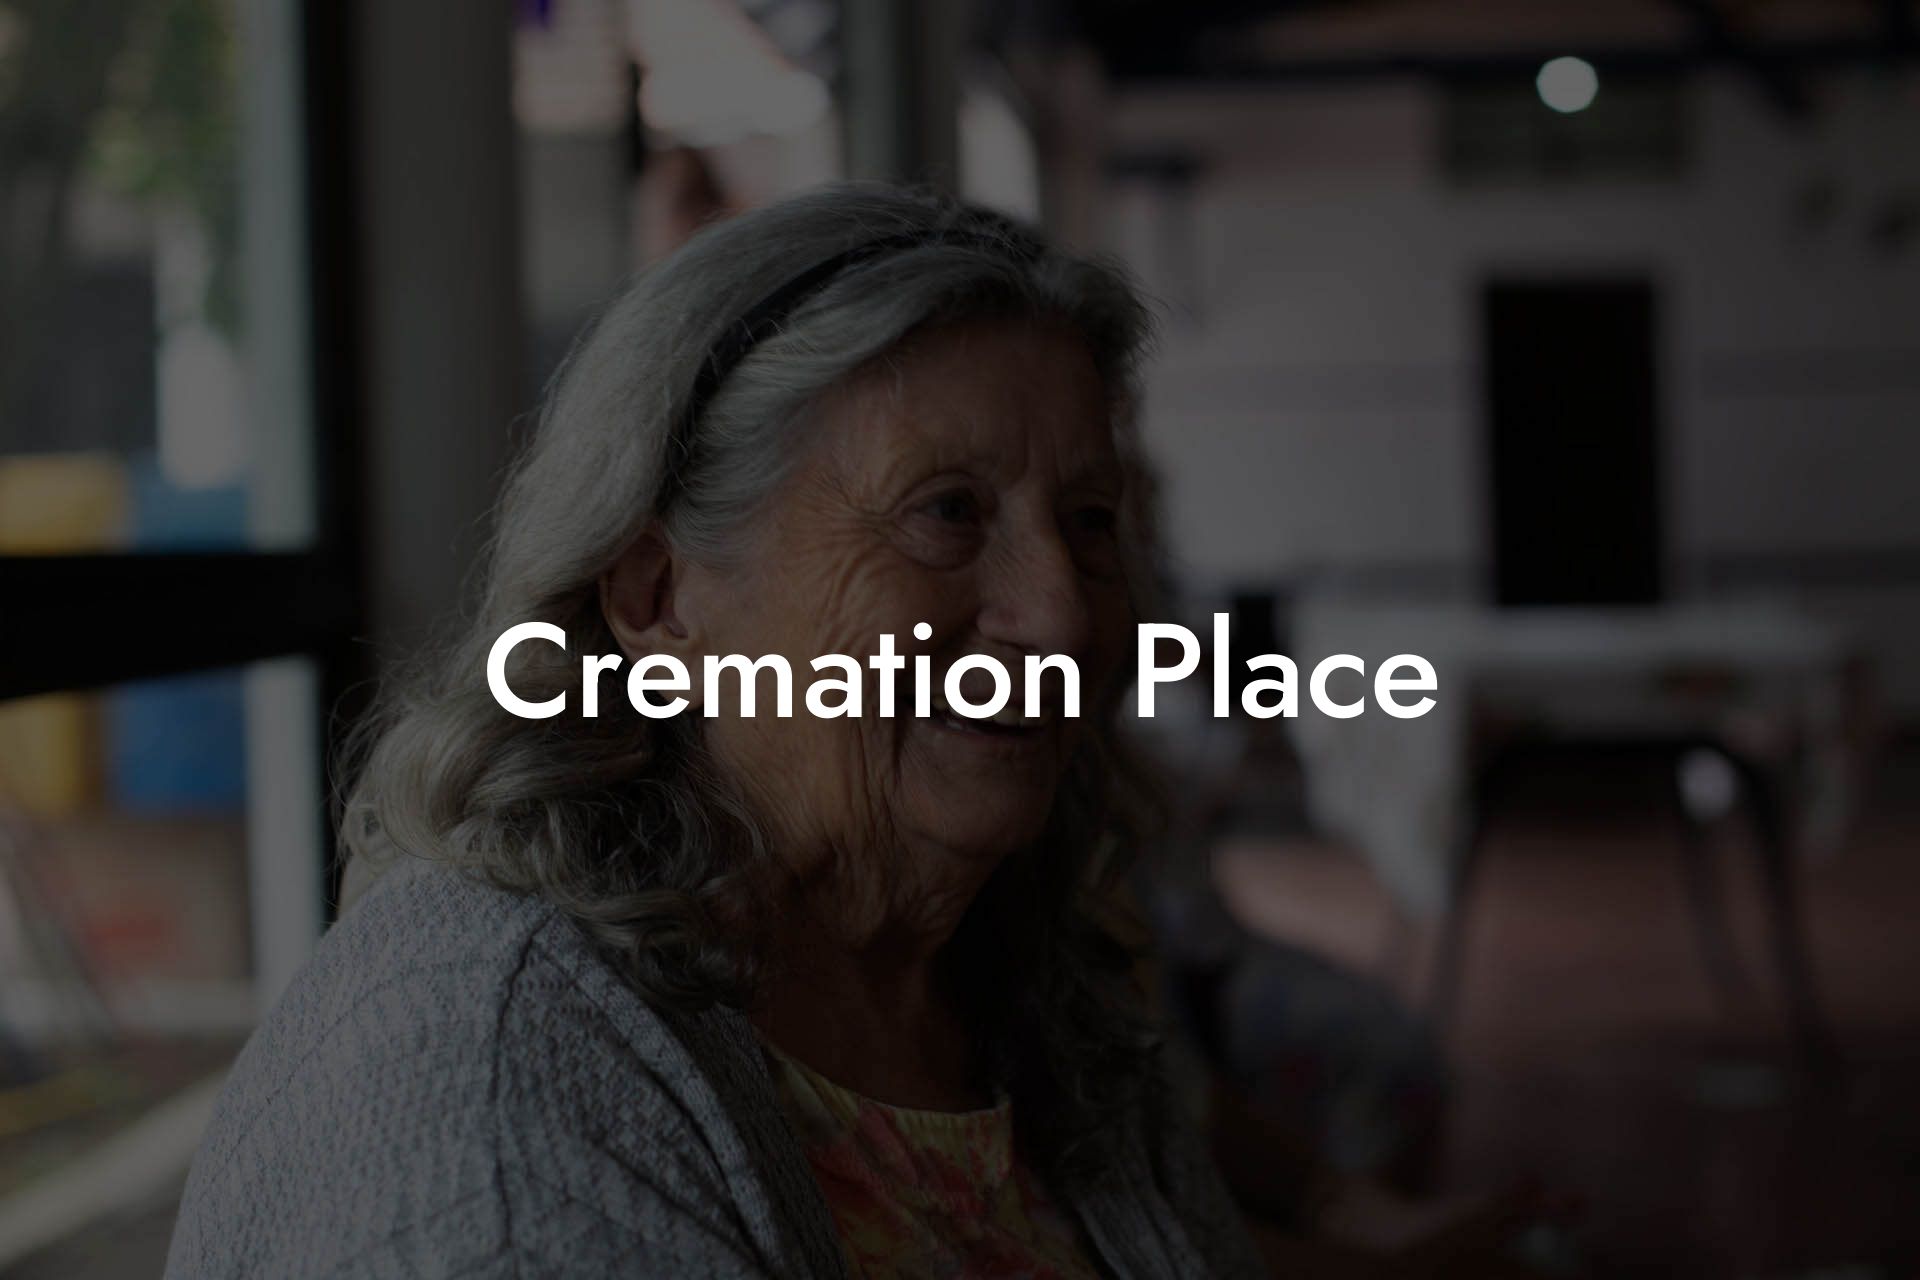 Cremation Place